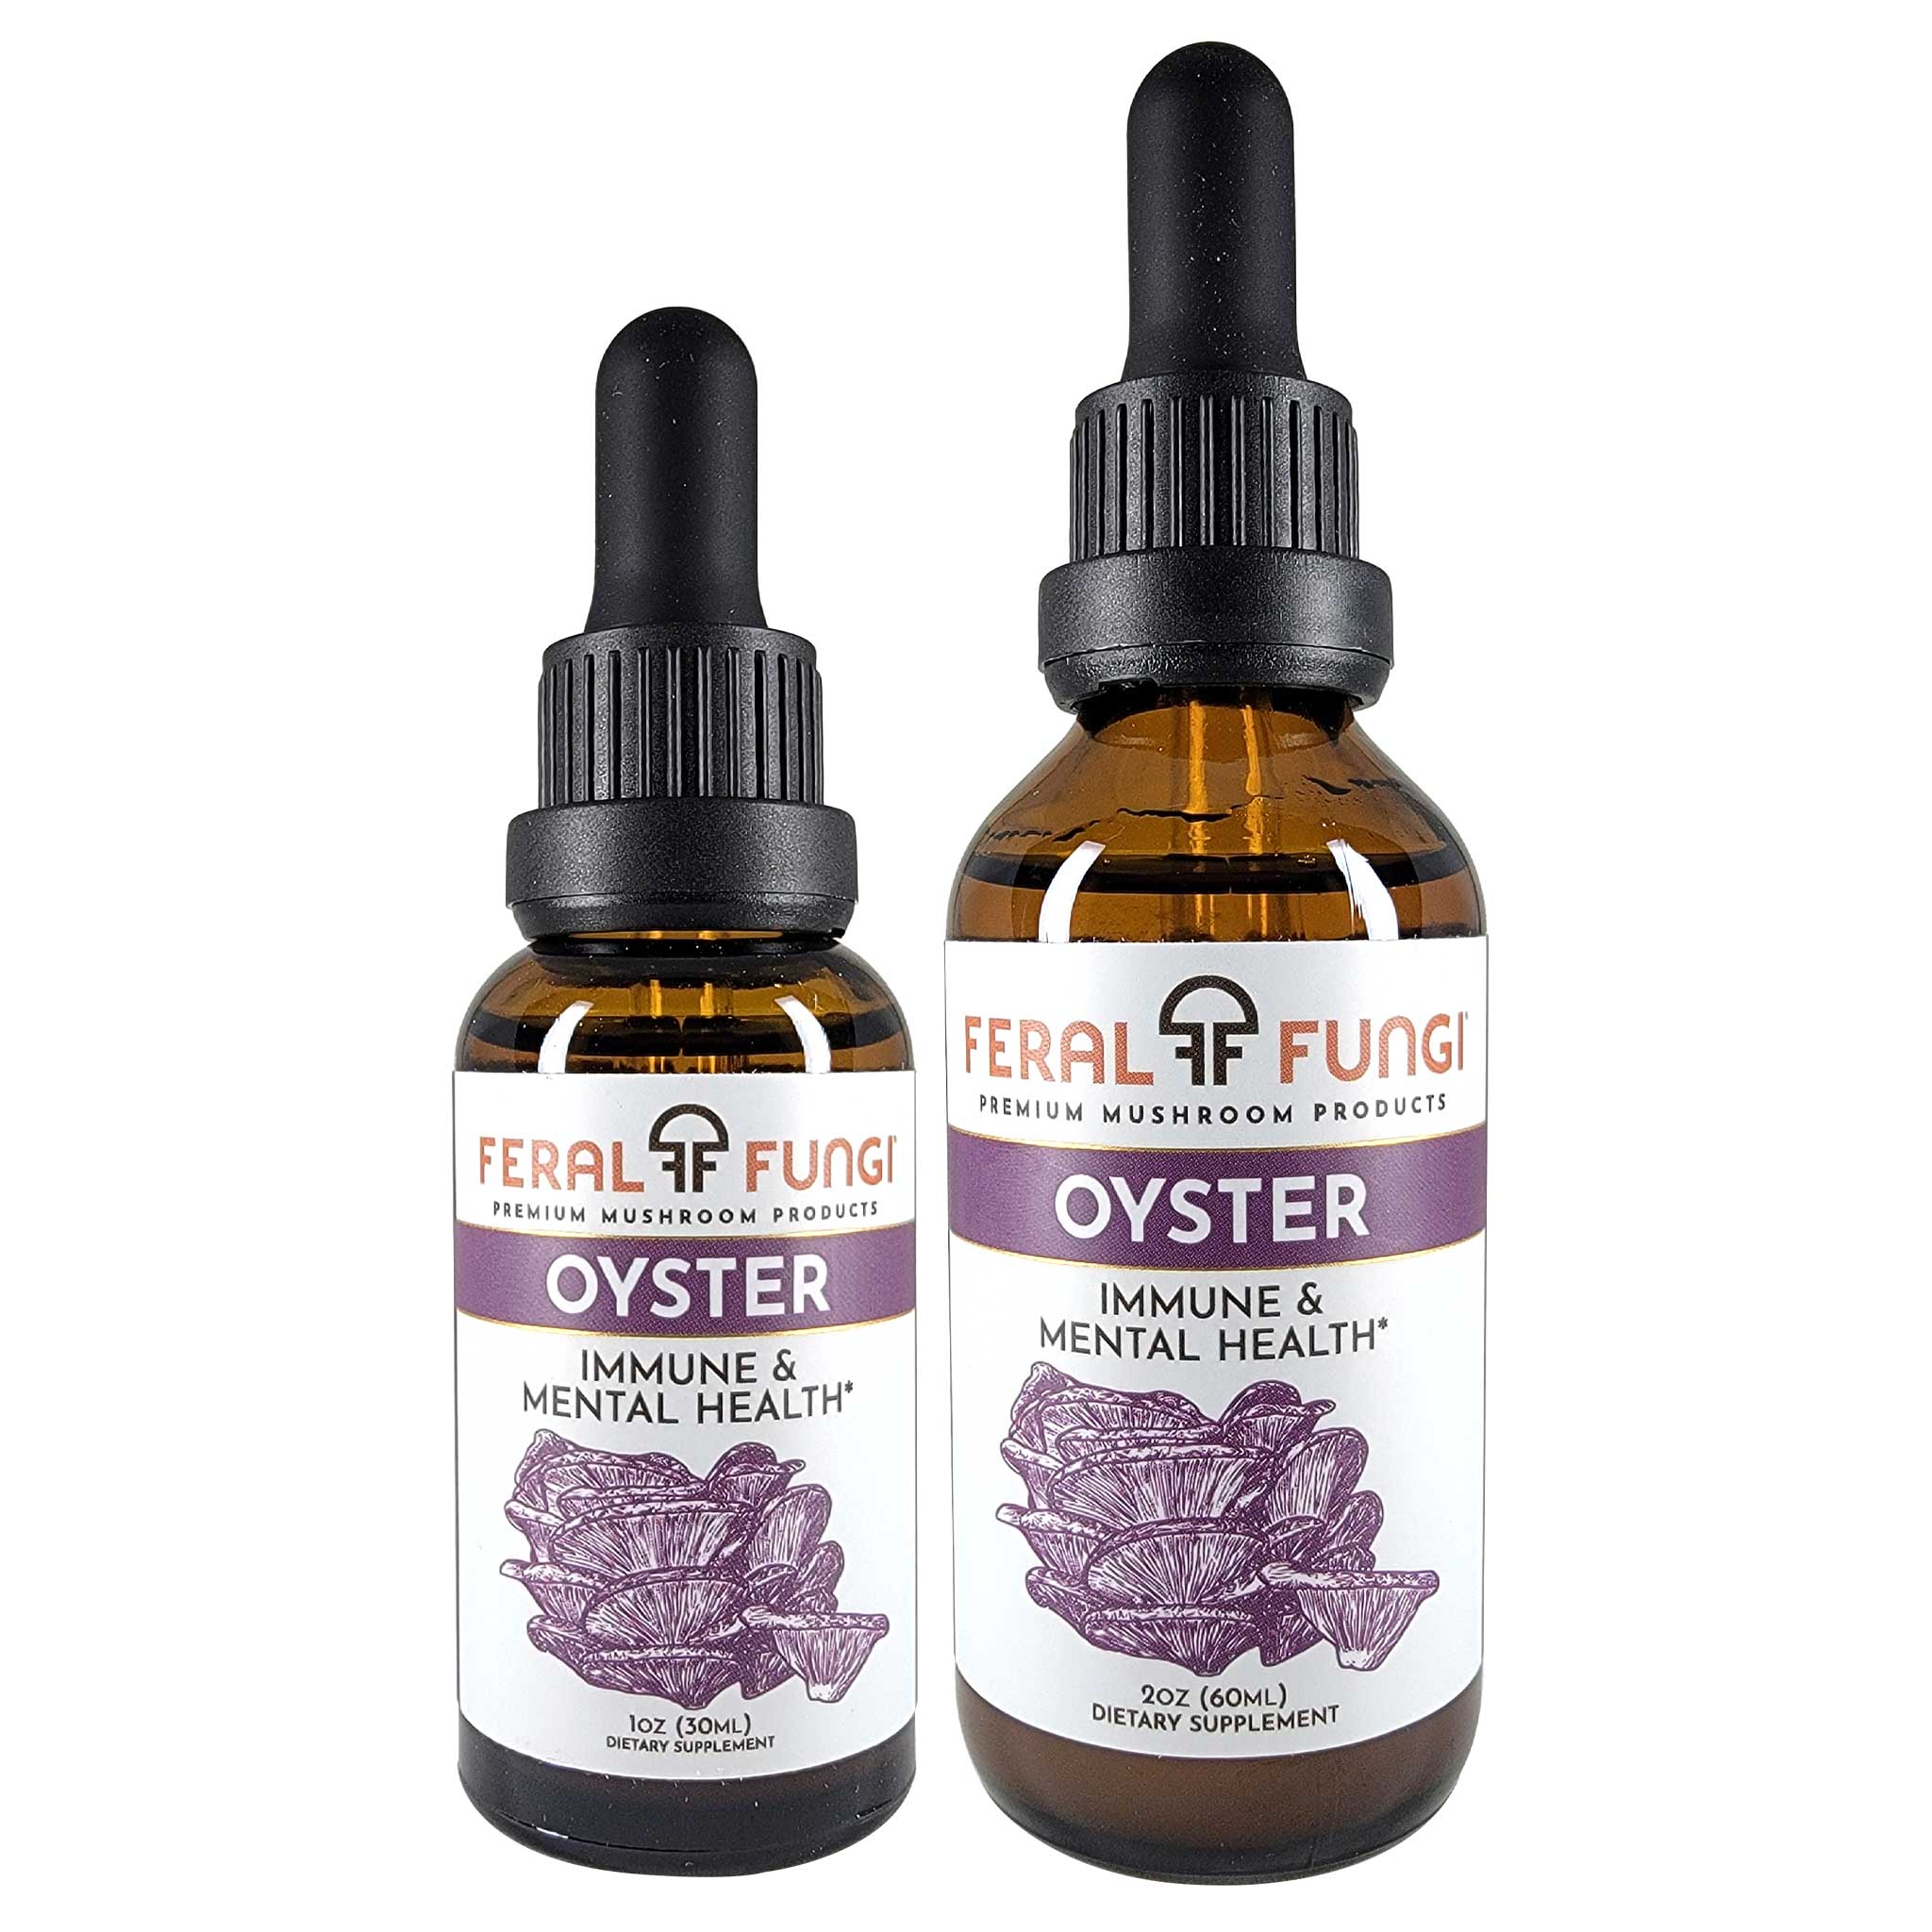 Oyster-Feral-Fungi-Mushroom-Tincture-Find-Your-Fungi-Sizes.jpg